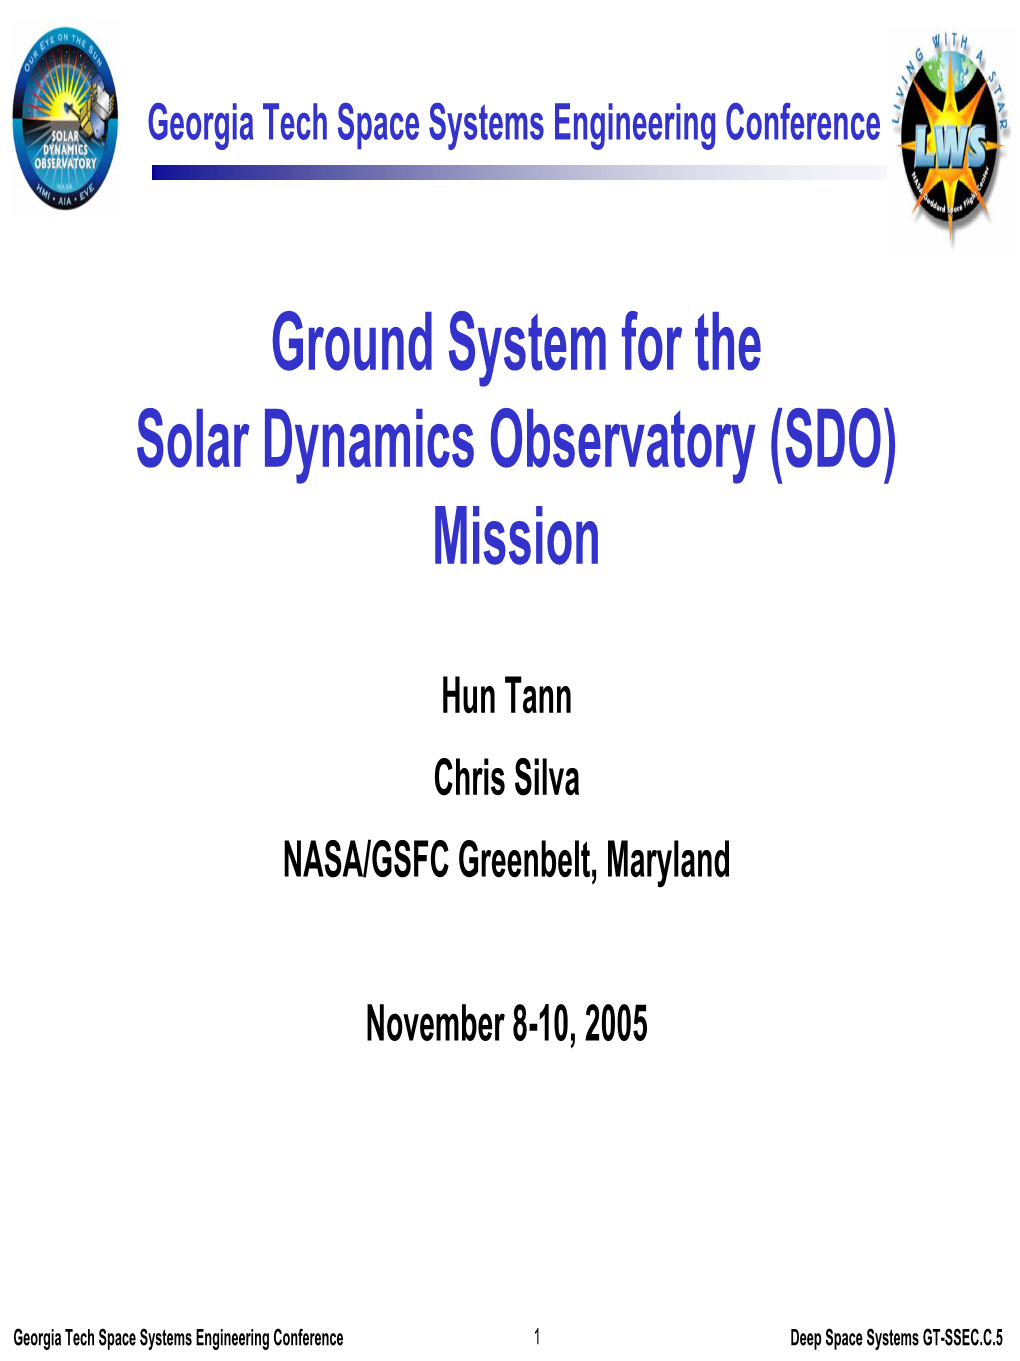 Ground System for the Solar Dynamics Observatory (SDO) Mission